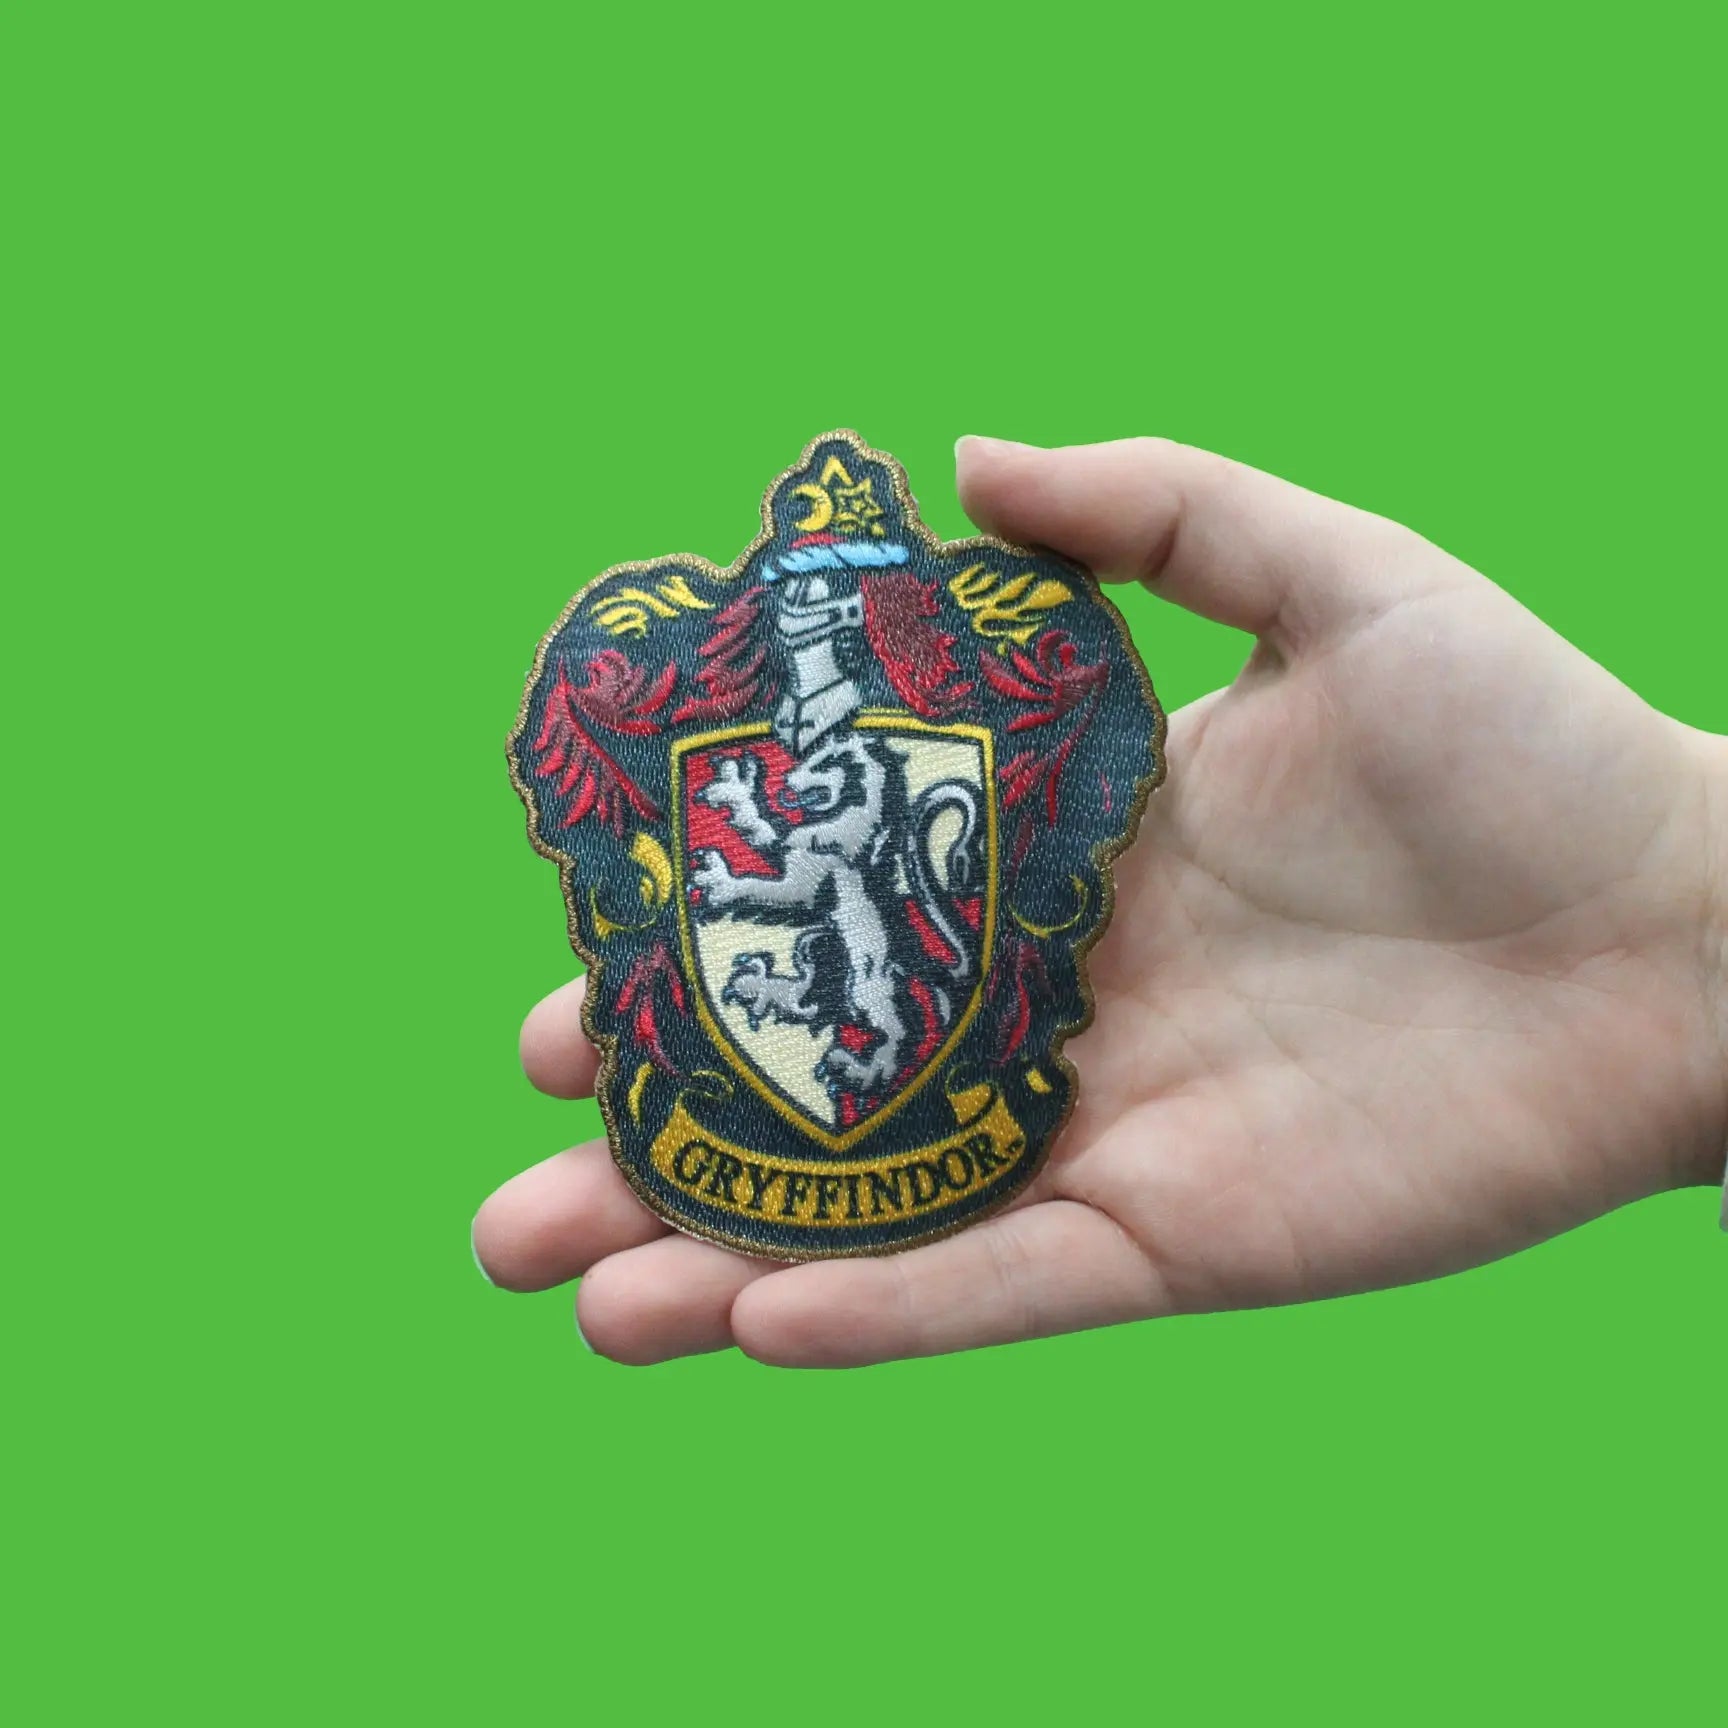 The Official Harry Potter Gryffindor House Crest Shaped Coin